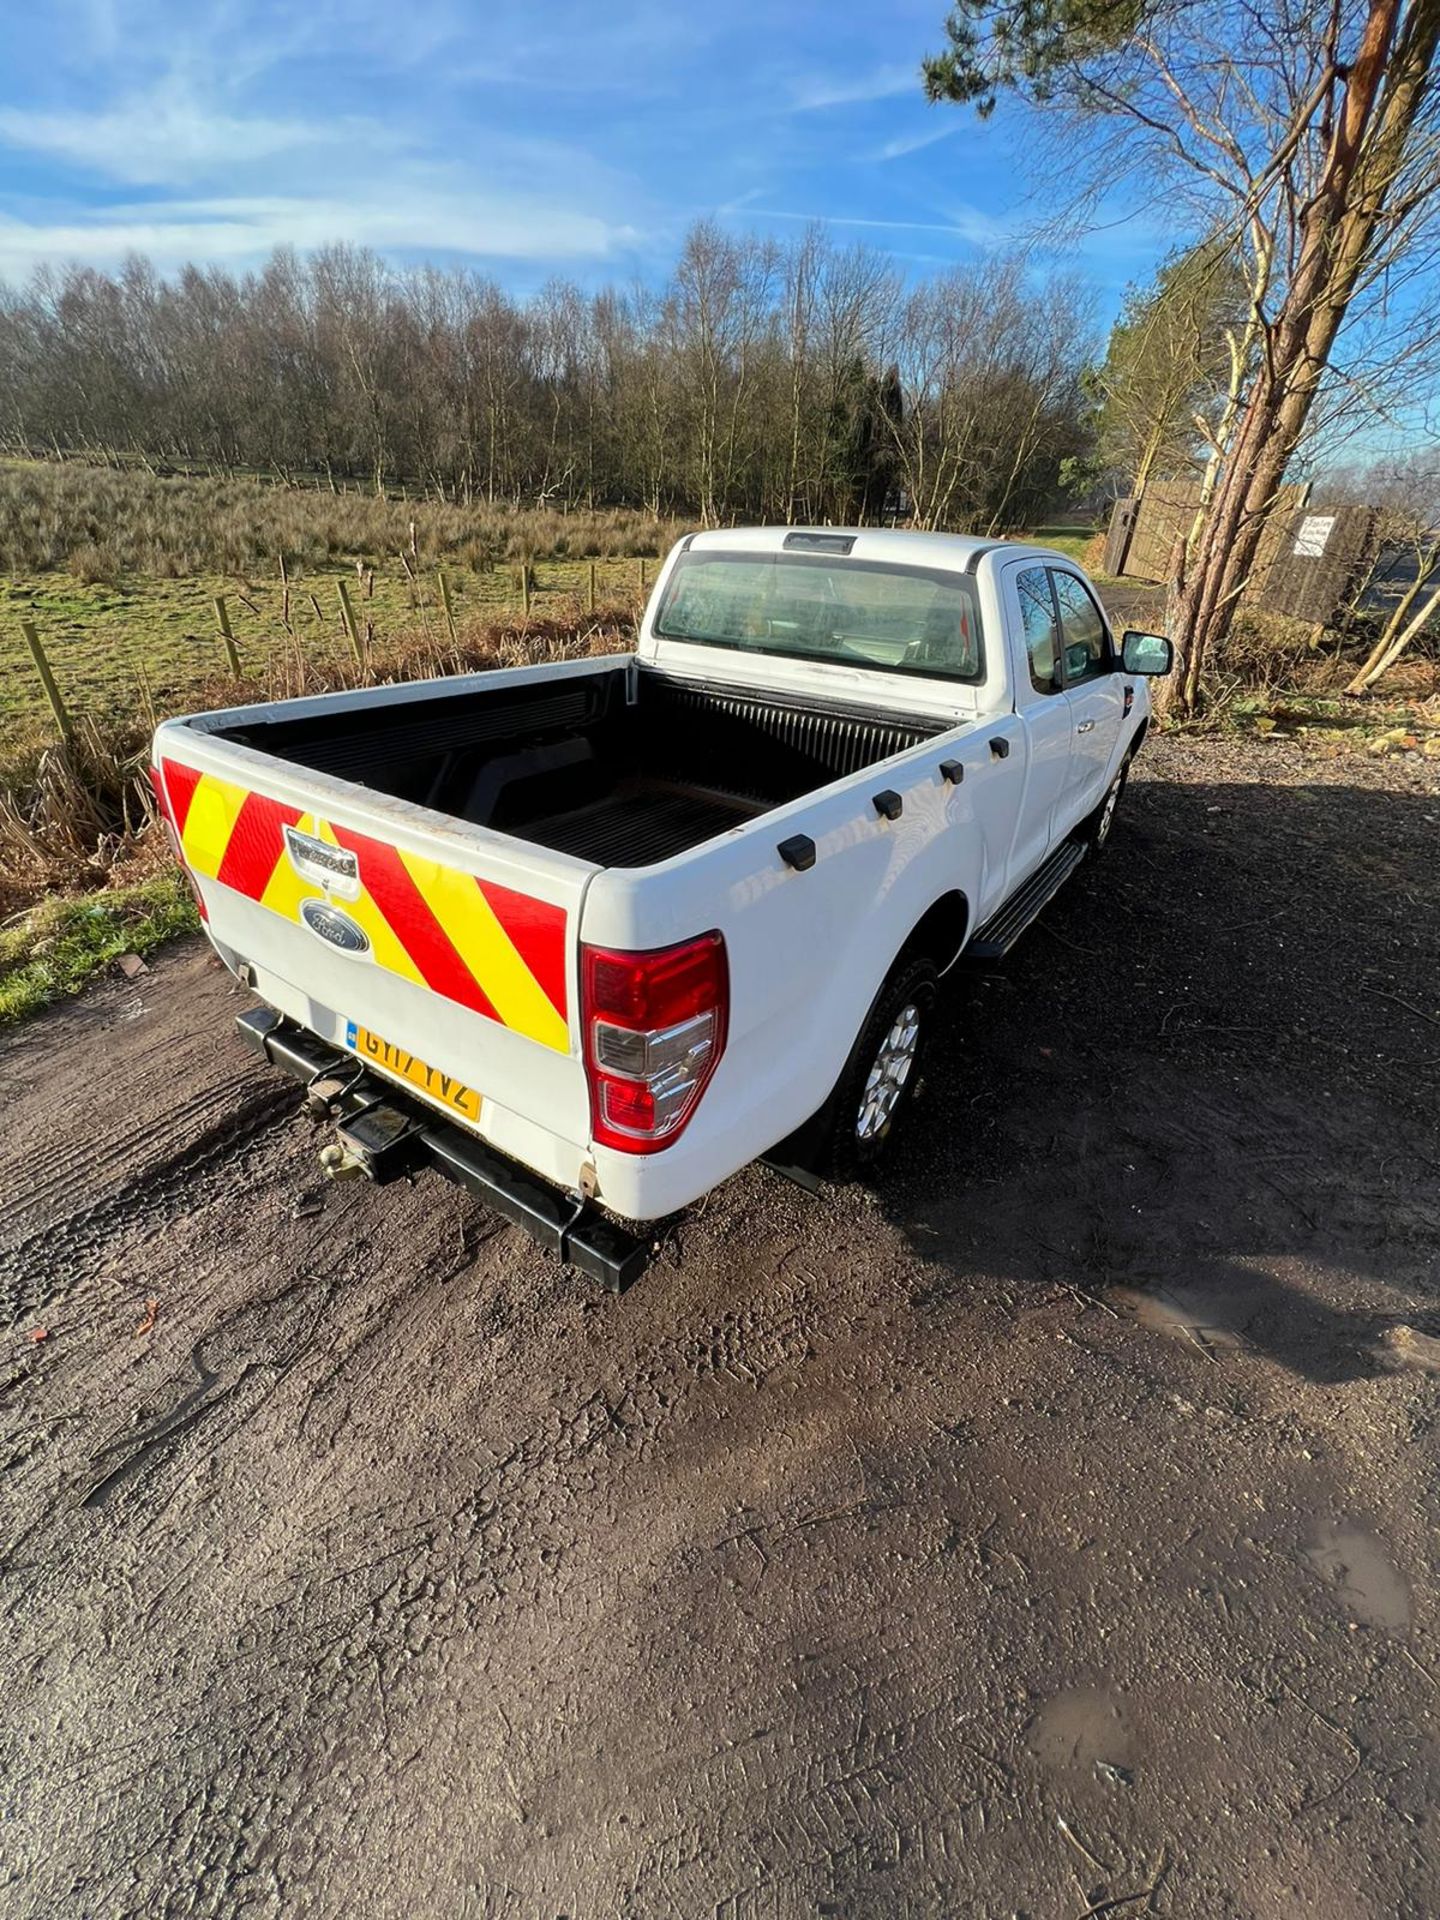 2017 FORD RANGER KING CAB EXSTRA CAB CAB AND HALF - Image 16 of 19